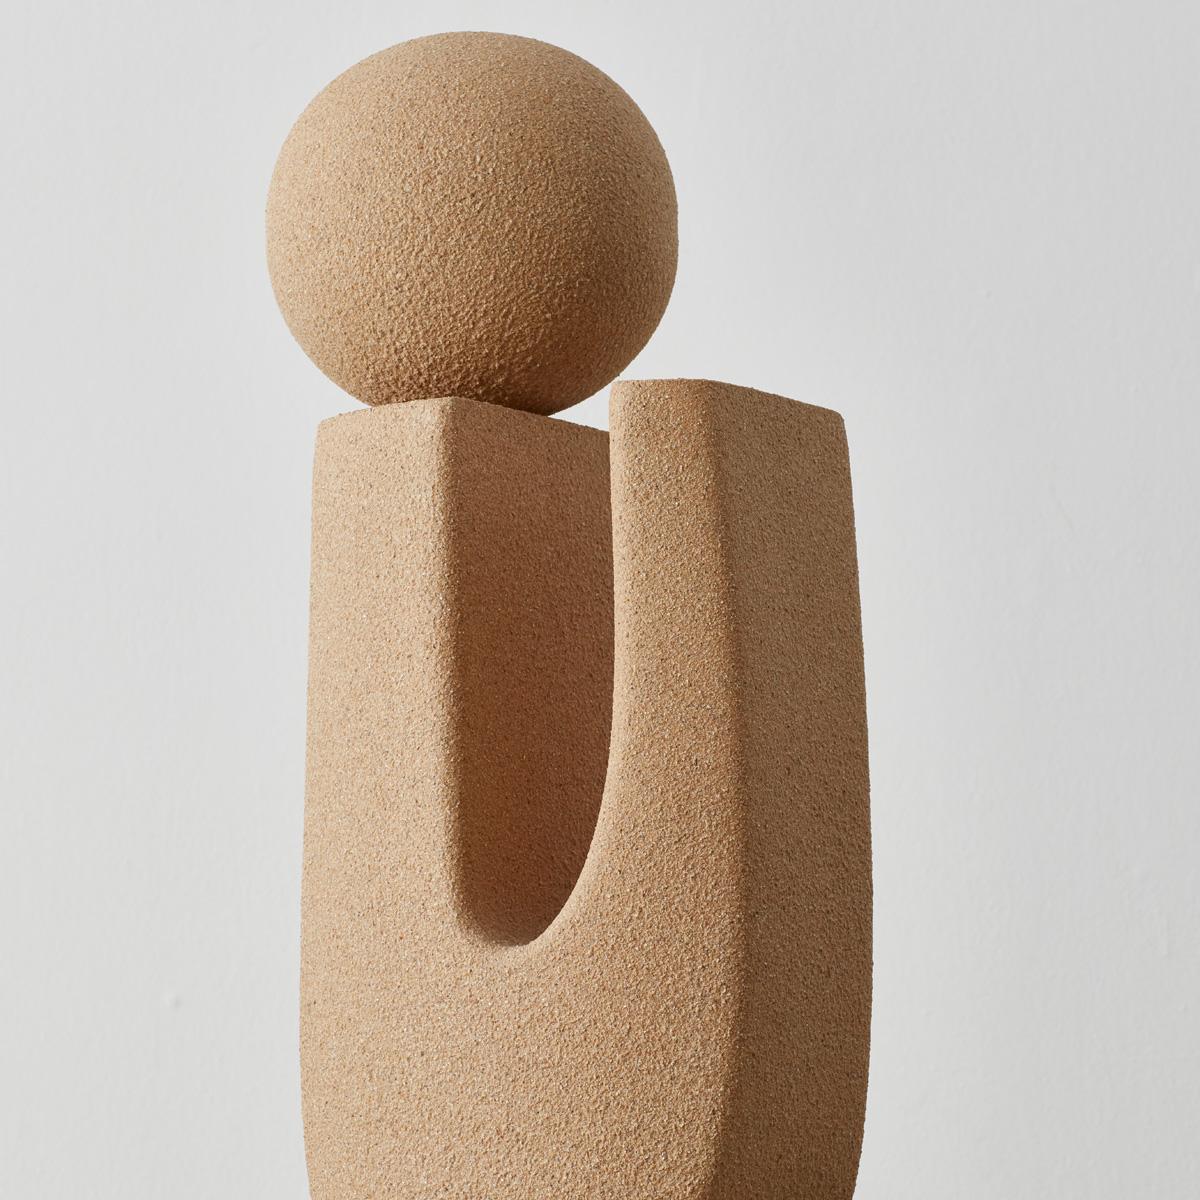 Late 20th Century Abstract TOTEM Sculpture in Sand and Resin, France, c1970